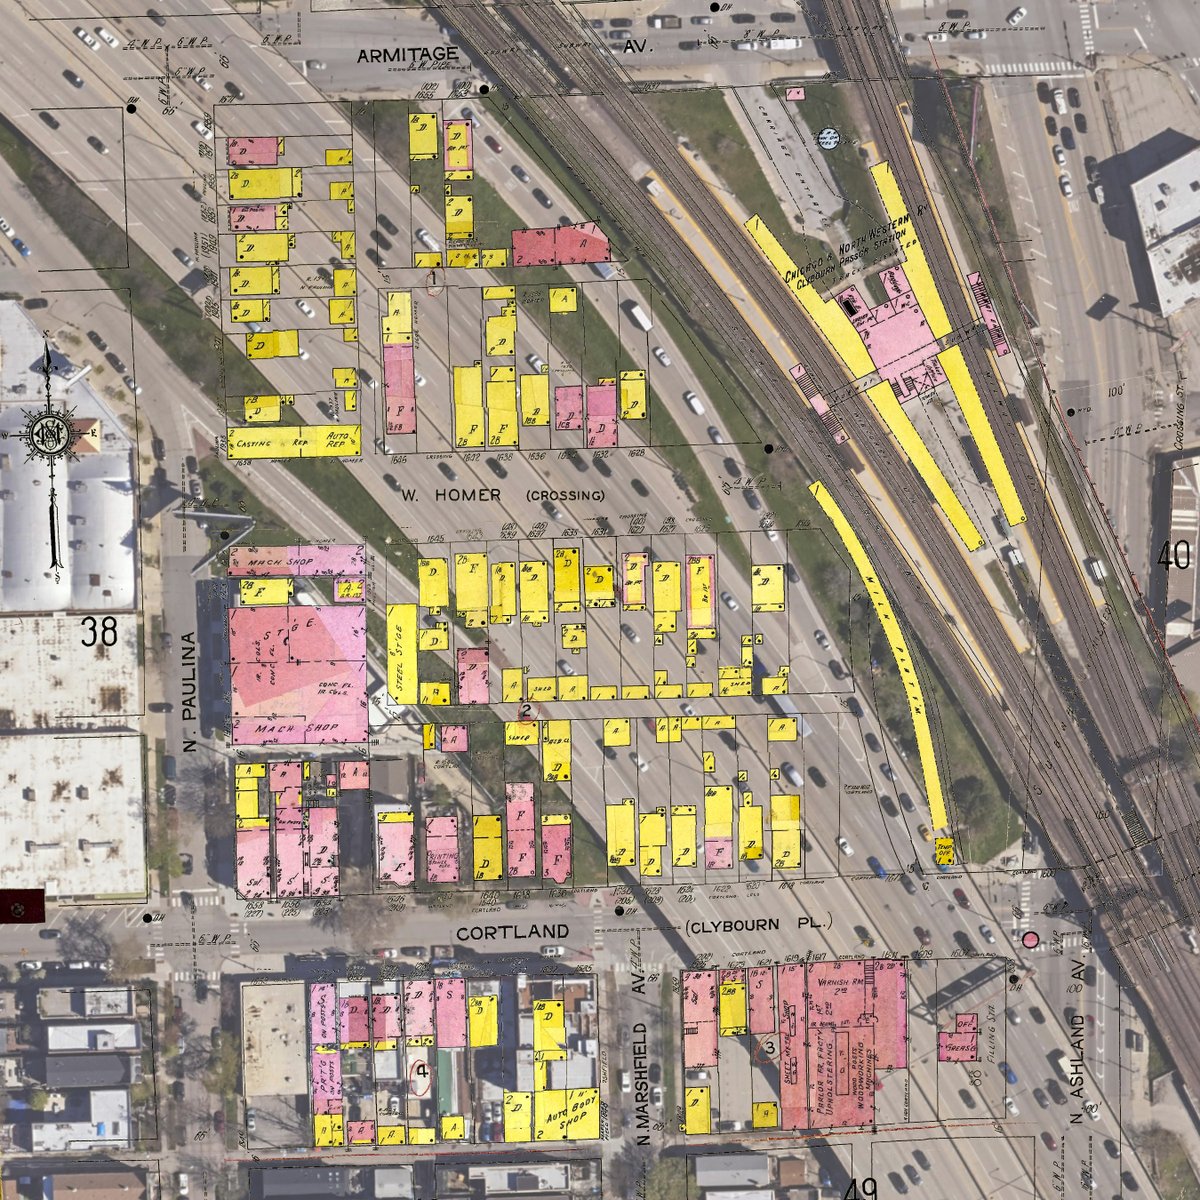 Superimposing old Sanborn maps over modern aerial imagery can reveal a lot about the past. In this case, it shows just how much housing was lost to urban expressways. In this handful of Chicago blocks, 35 dwellings and 10 flats were lost. That's, at bare minimum, 55 units gone.